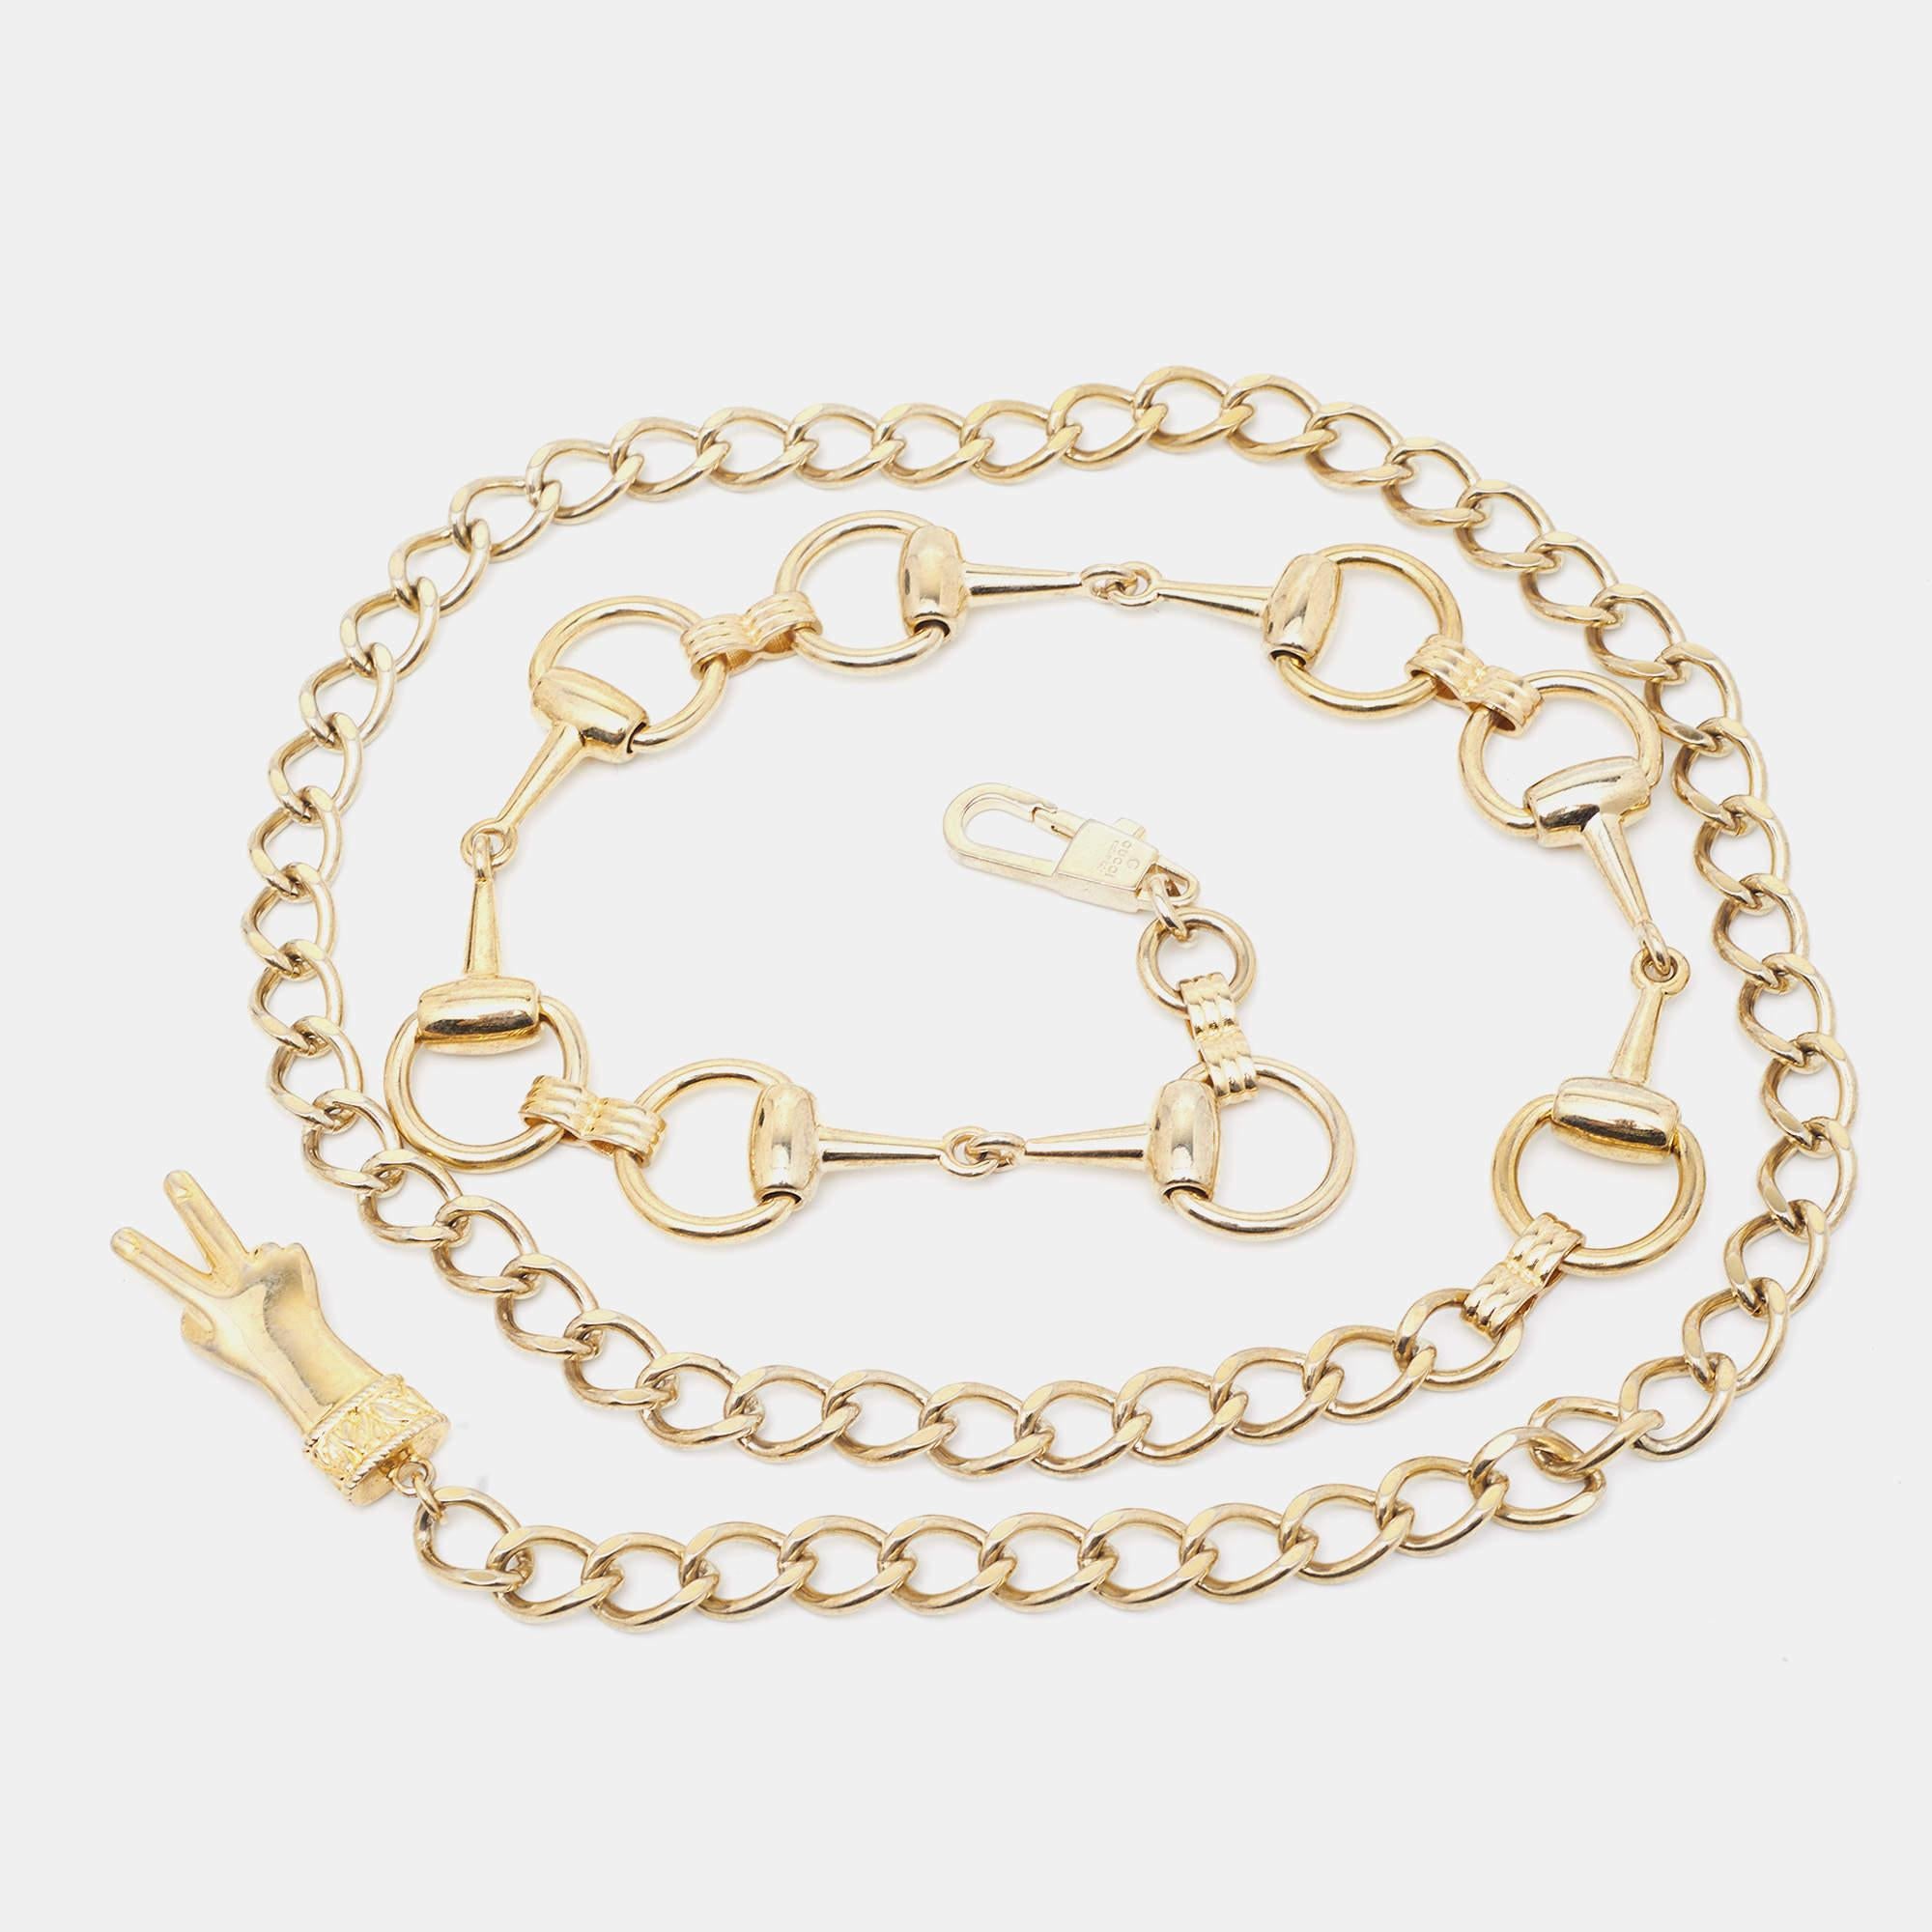 It features a gold-tone chain adorned with the iconic horsebit motif, creating a timeless and elegant look. This belt is a perfect statement piece to elevate any outfit with a touch of Gucci's signature style.

Includes: Original Dustbag
